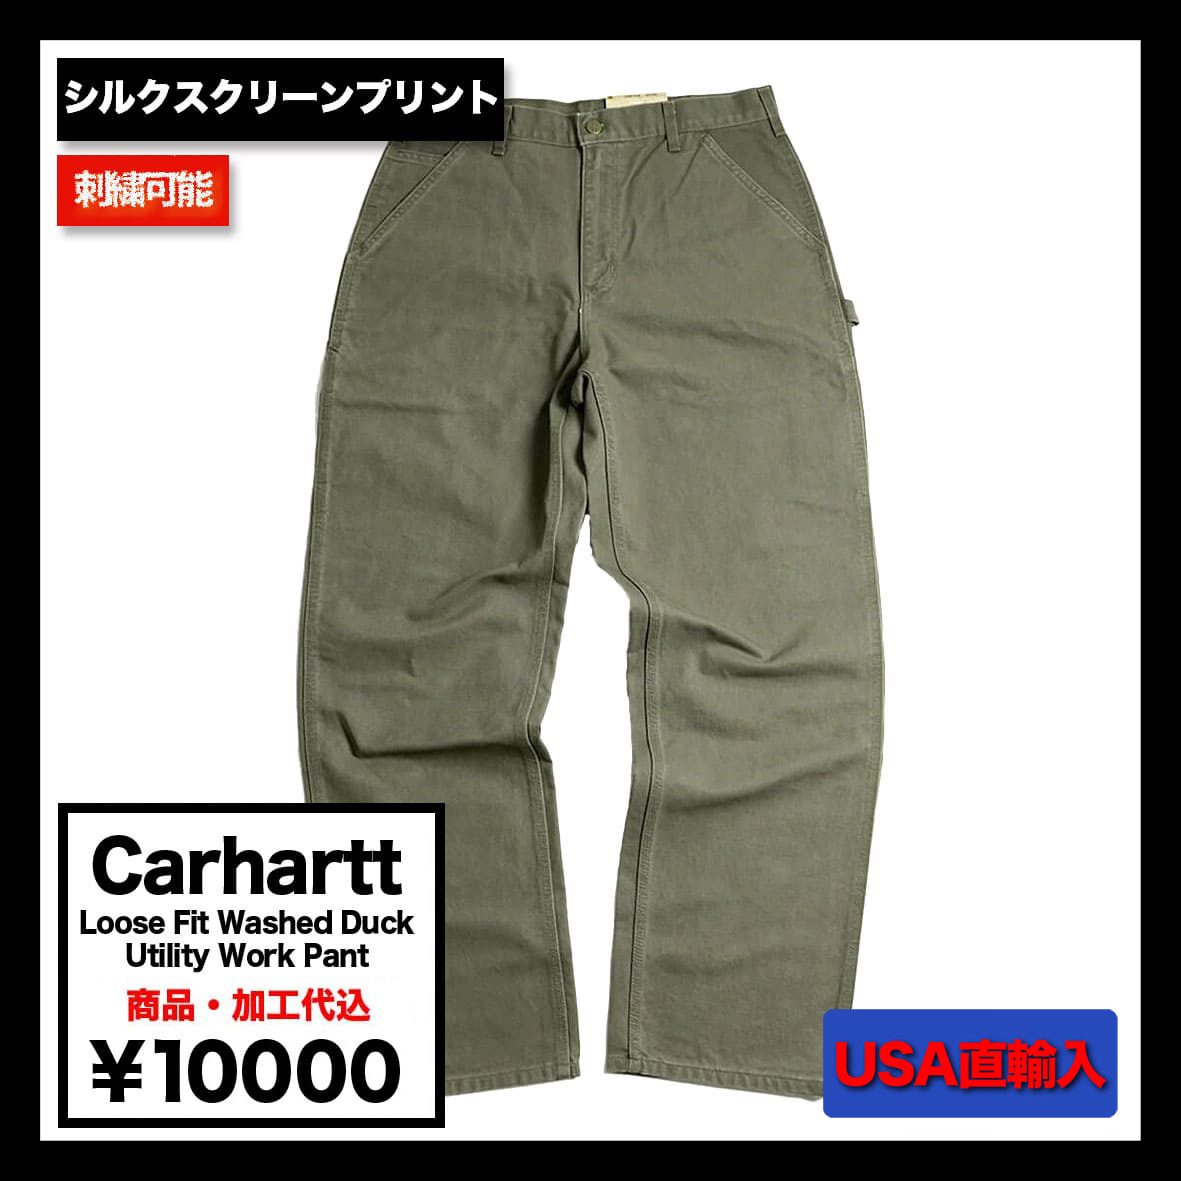 Carhartt カーハート Loose Fit Washed Duck Utility Work Pant (品番B11)